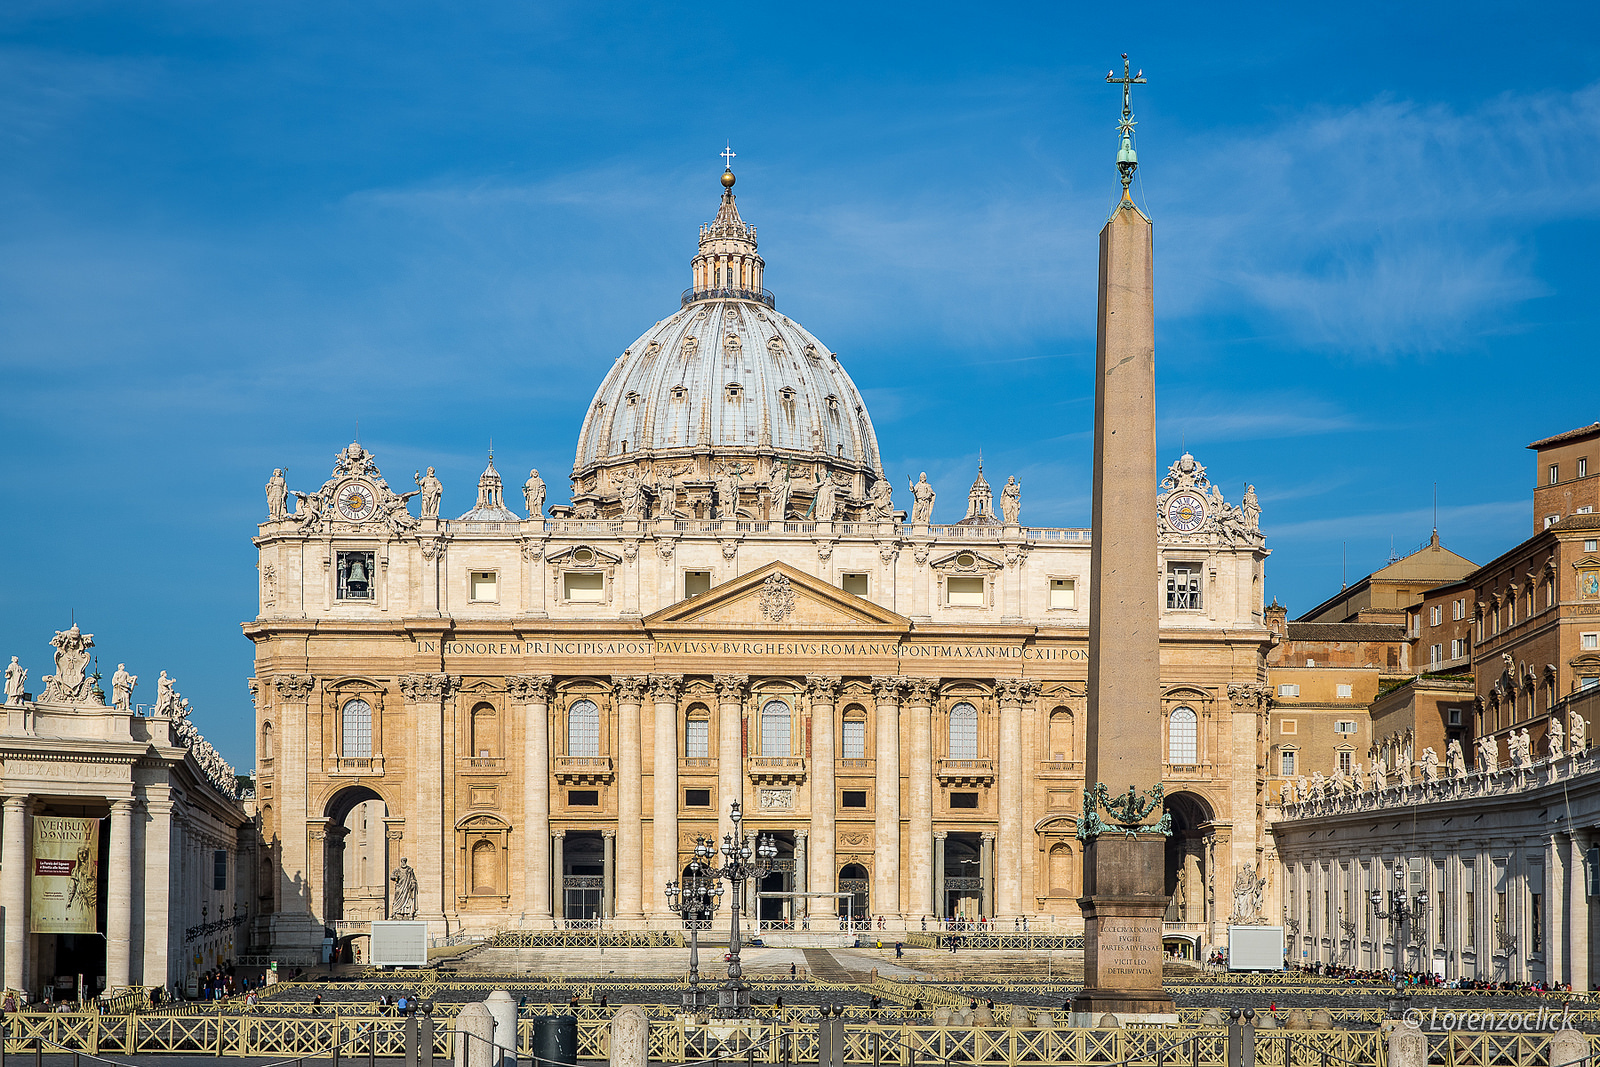 St. Peter’s Basilica Can Fulfill Your Soul